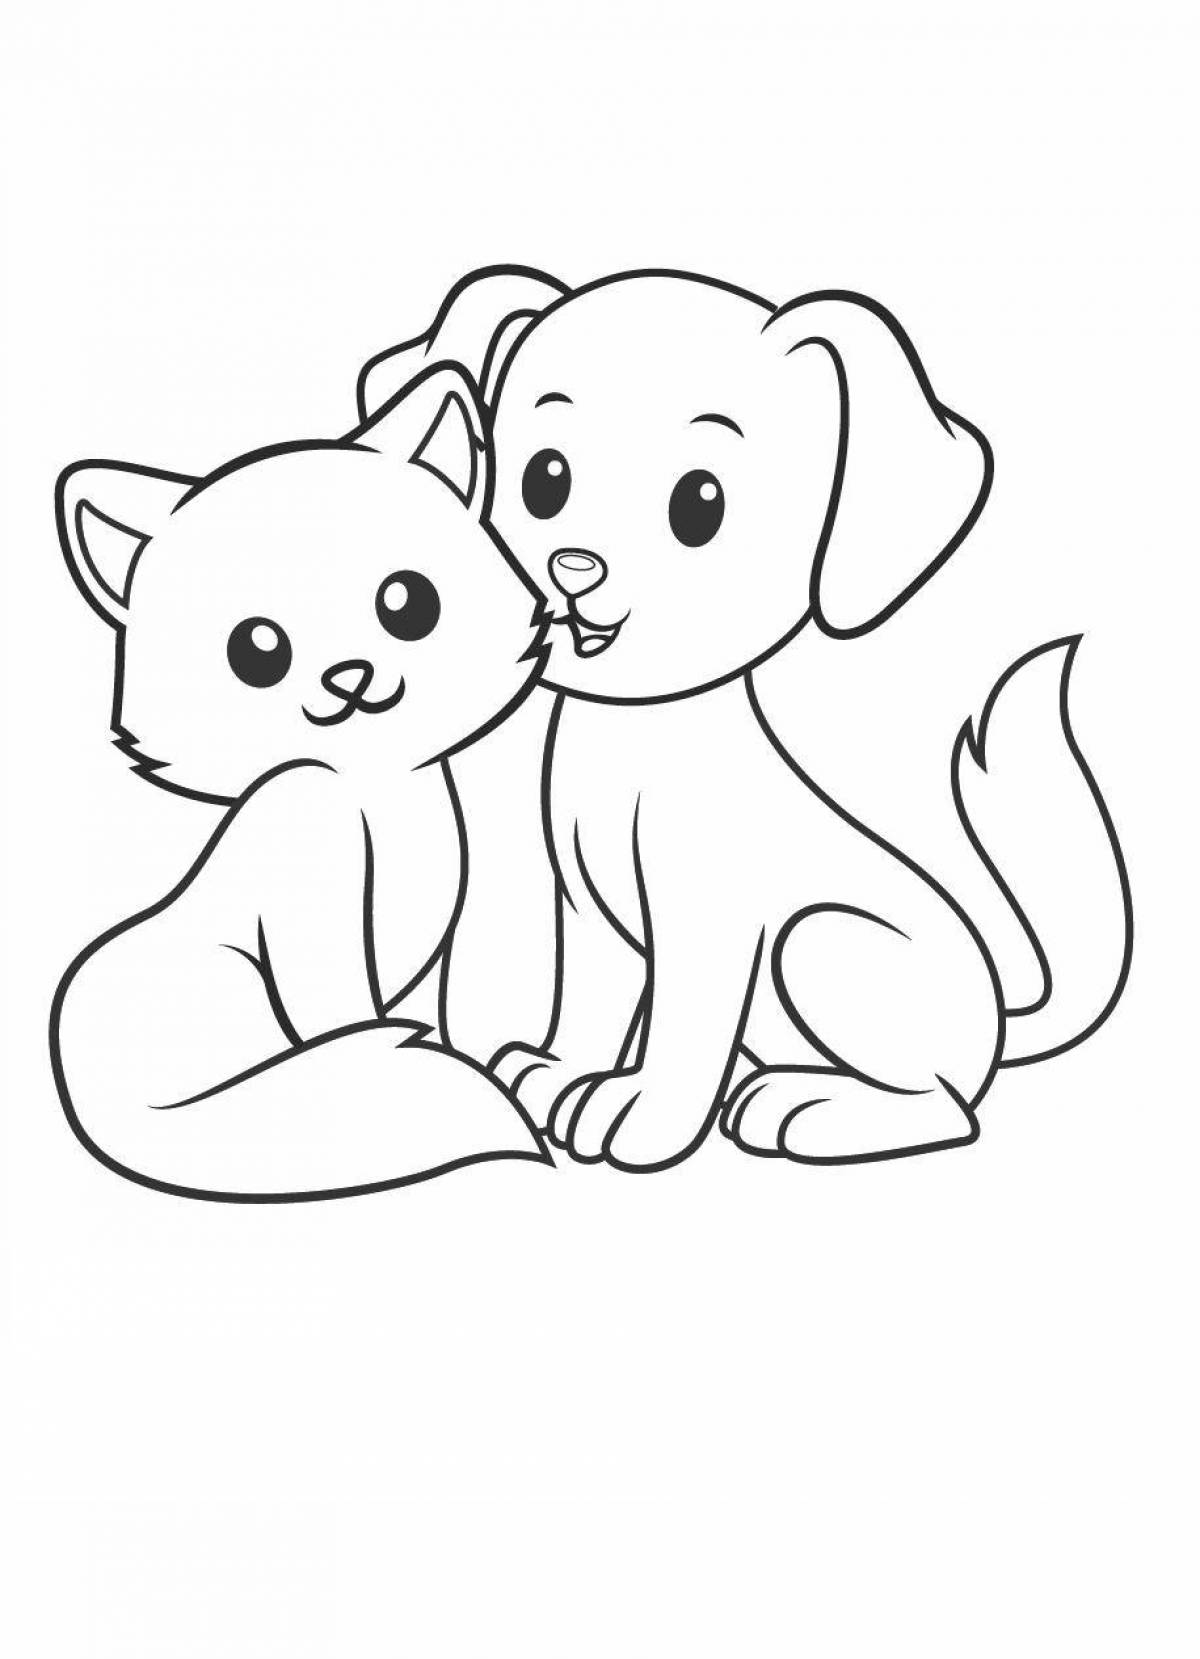 Snuggly cat and dog coloring page